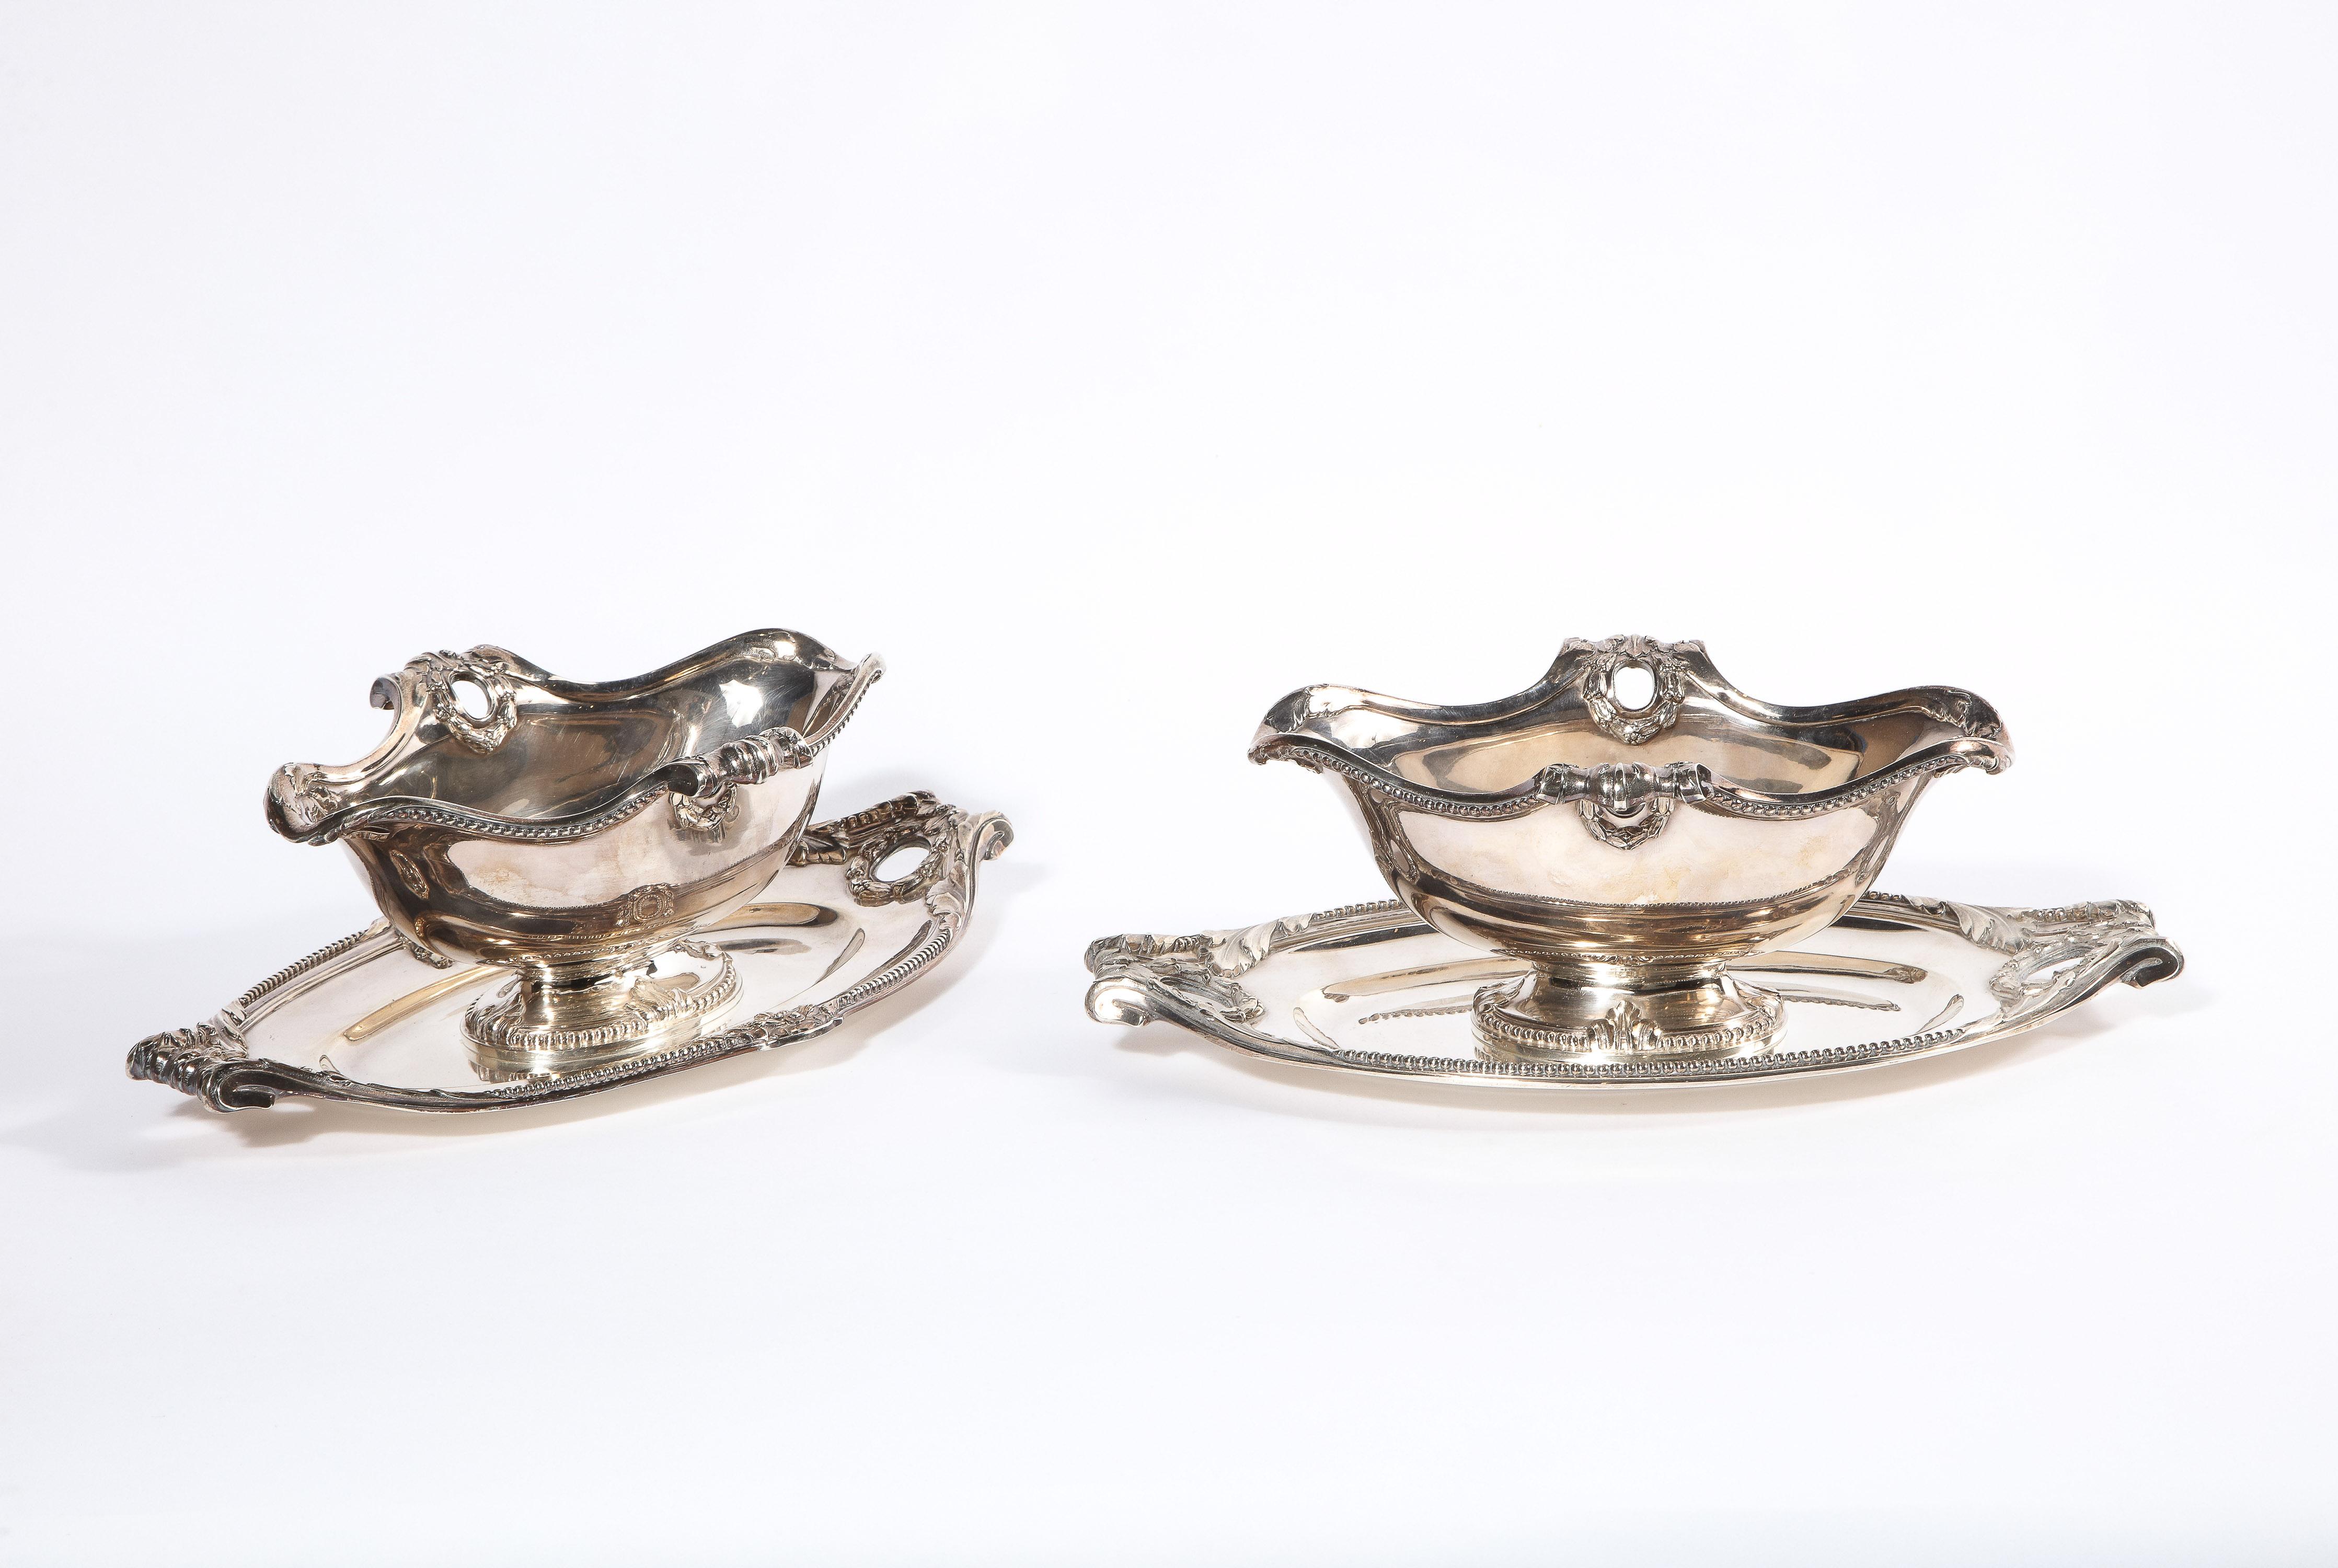 A pair of French silver Sauceboats, Possibly Tetard Freres Paris, Circa 1880

A magnificent quality pair of silver sauceboats / gravy dishes. With french silver hallmarks, no makers mark but the quality led us to believe they are possibly by